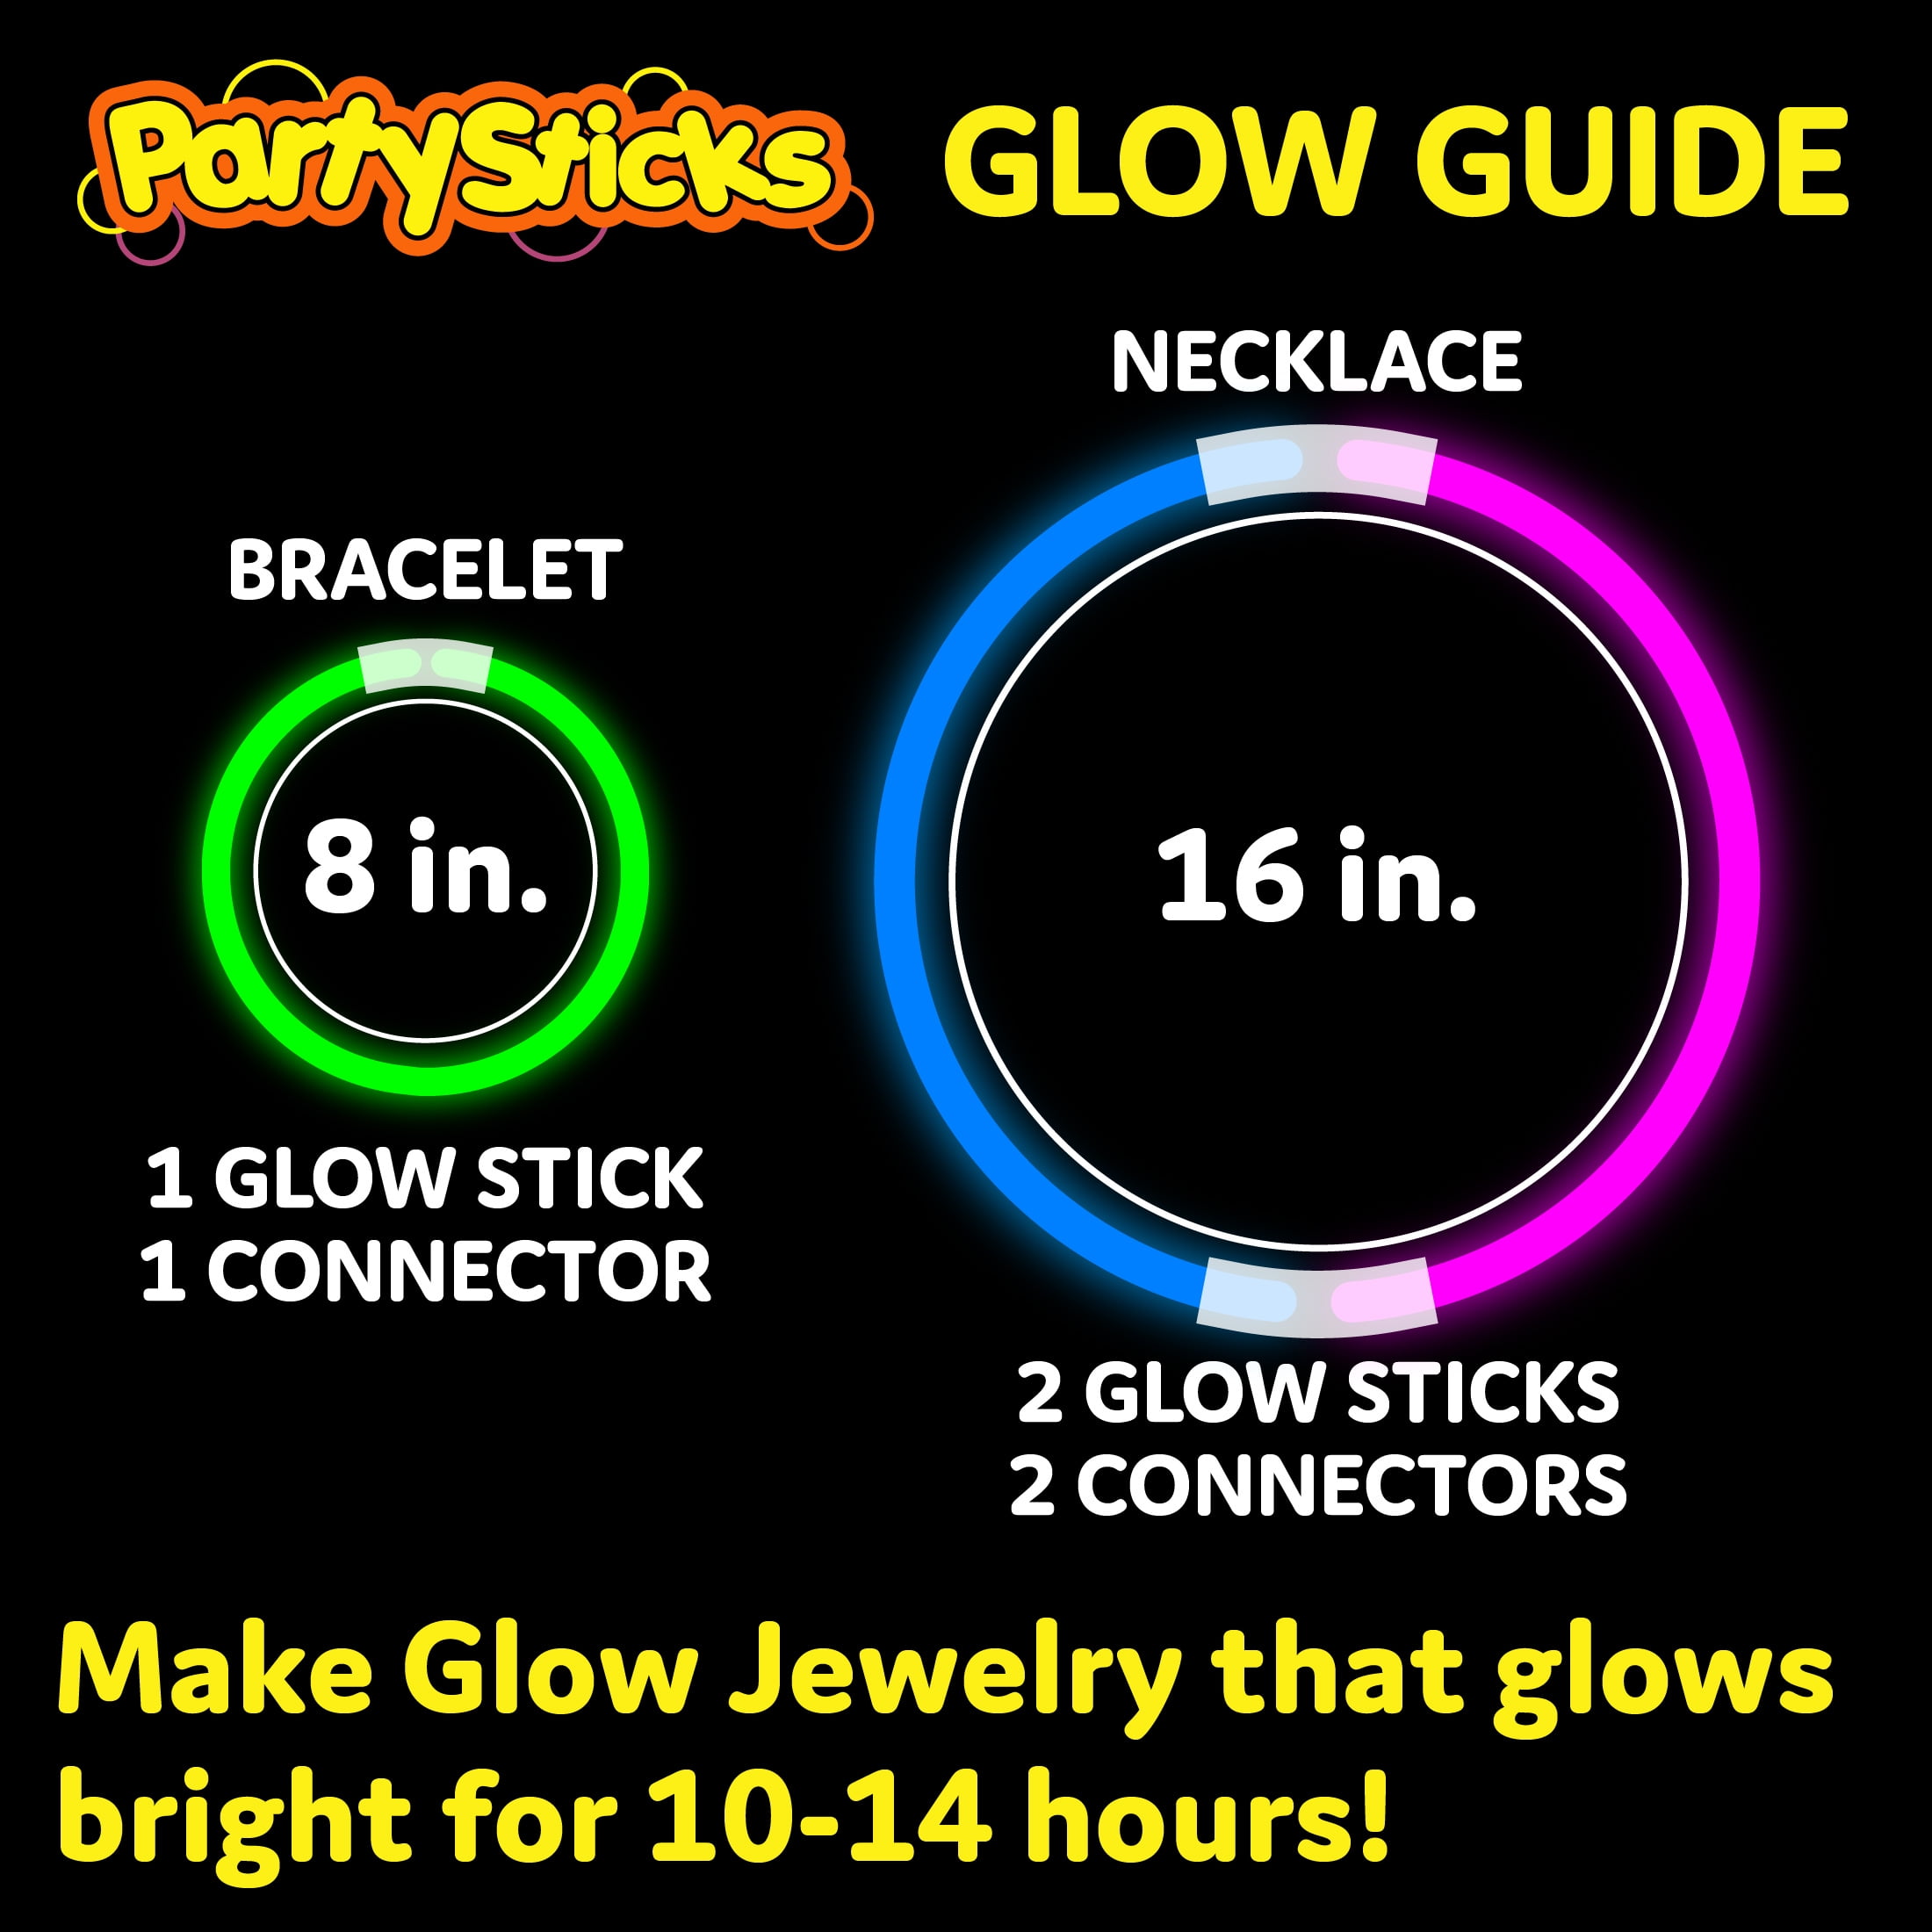 Glow Sticks Bulk 900 Count - 8 Glow In the Dark Light Sticks - Party  Favors & Supplies for Camping, Raves & Birthday Parties 